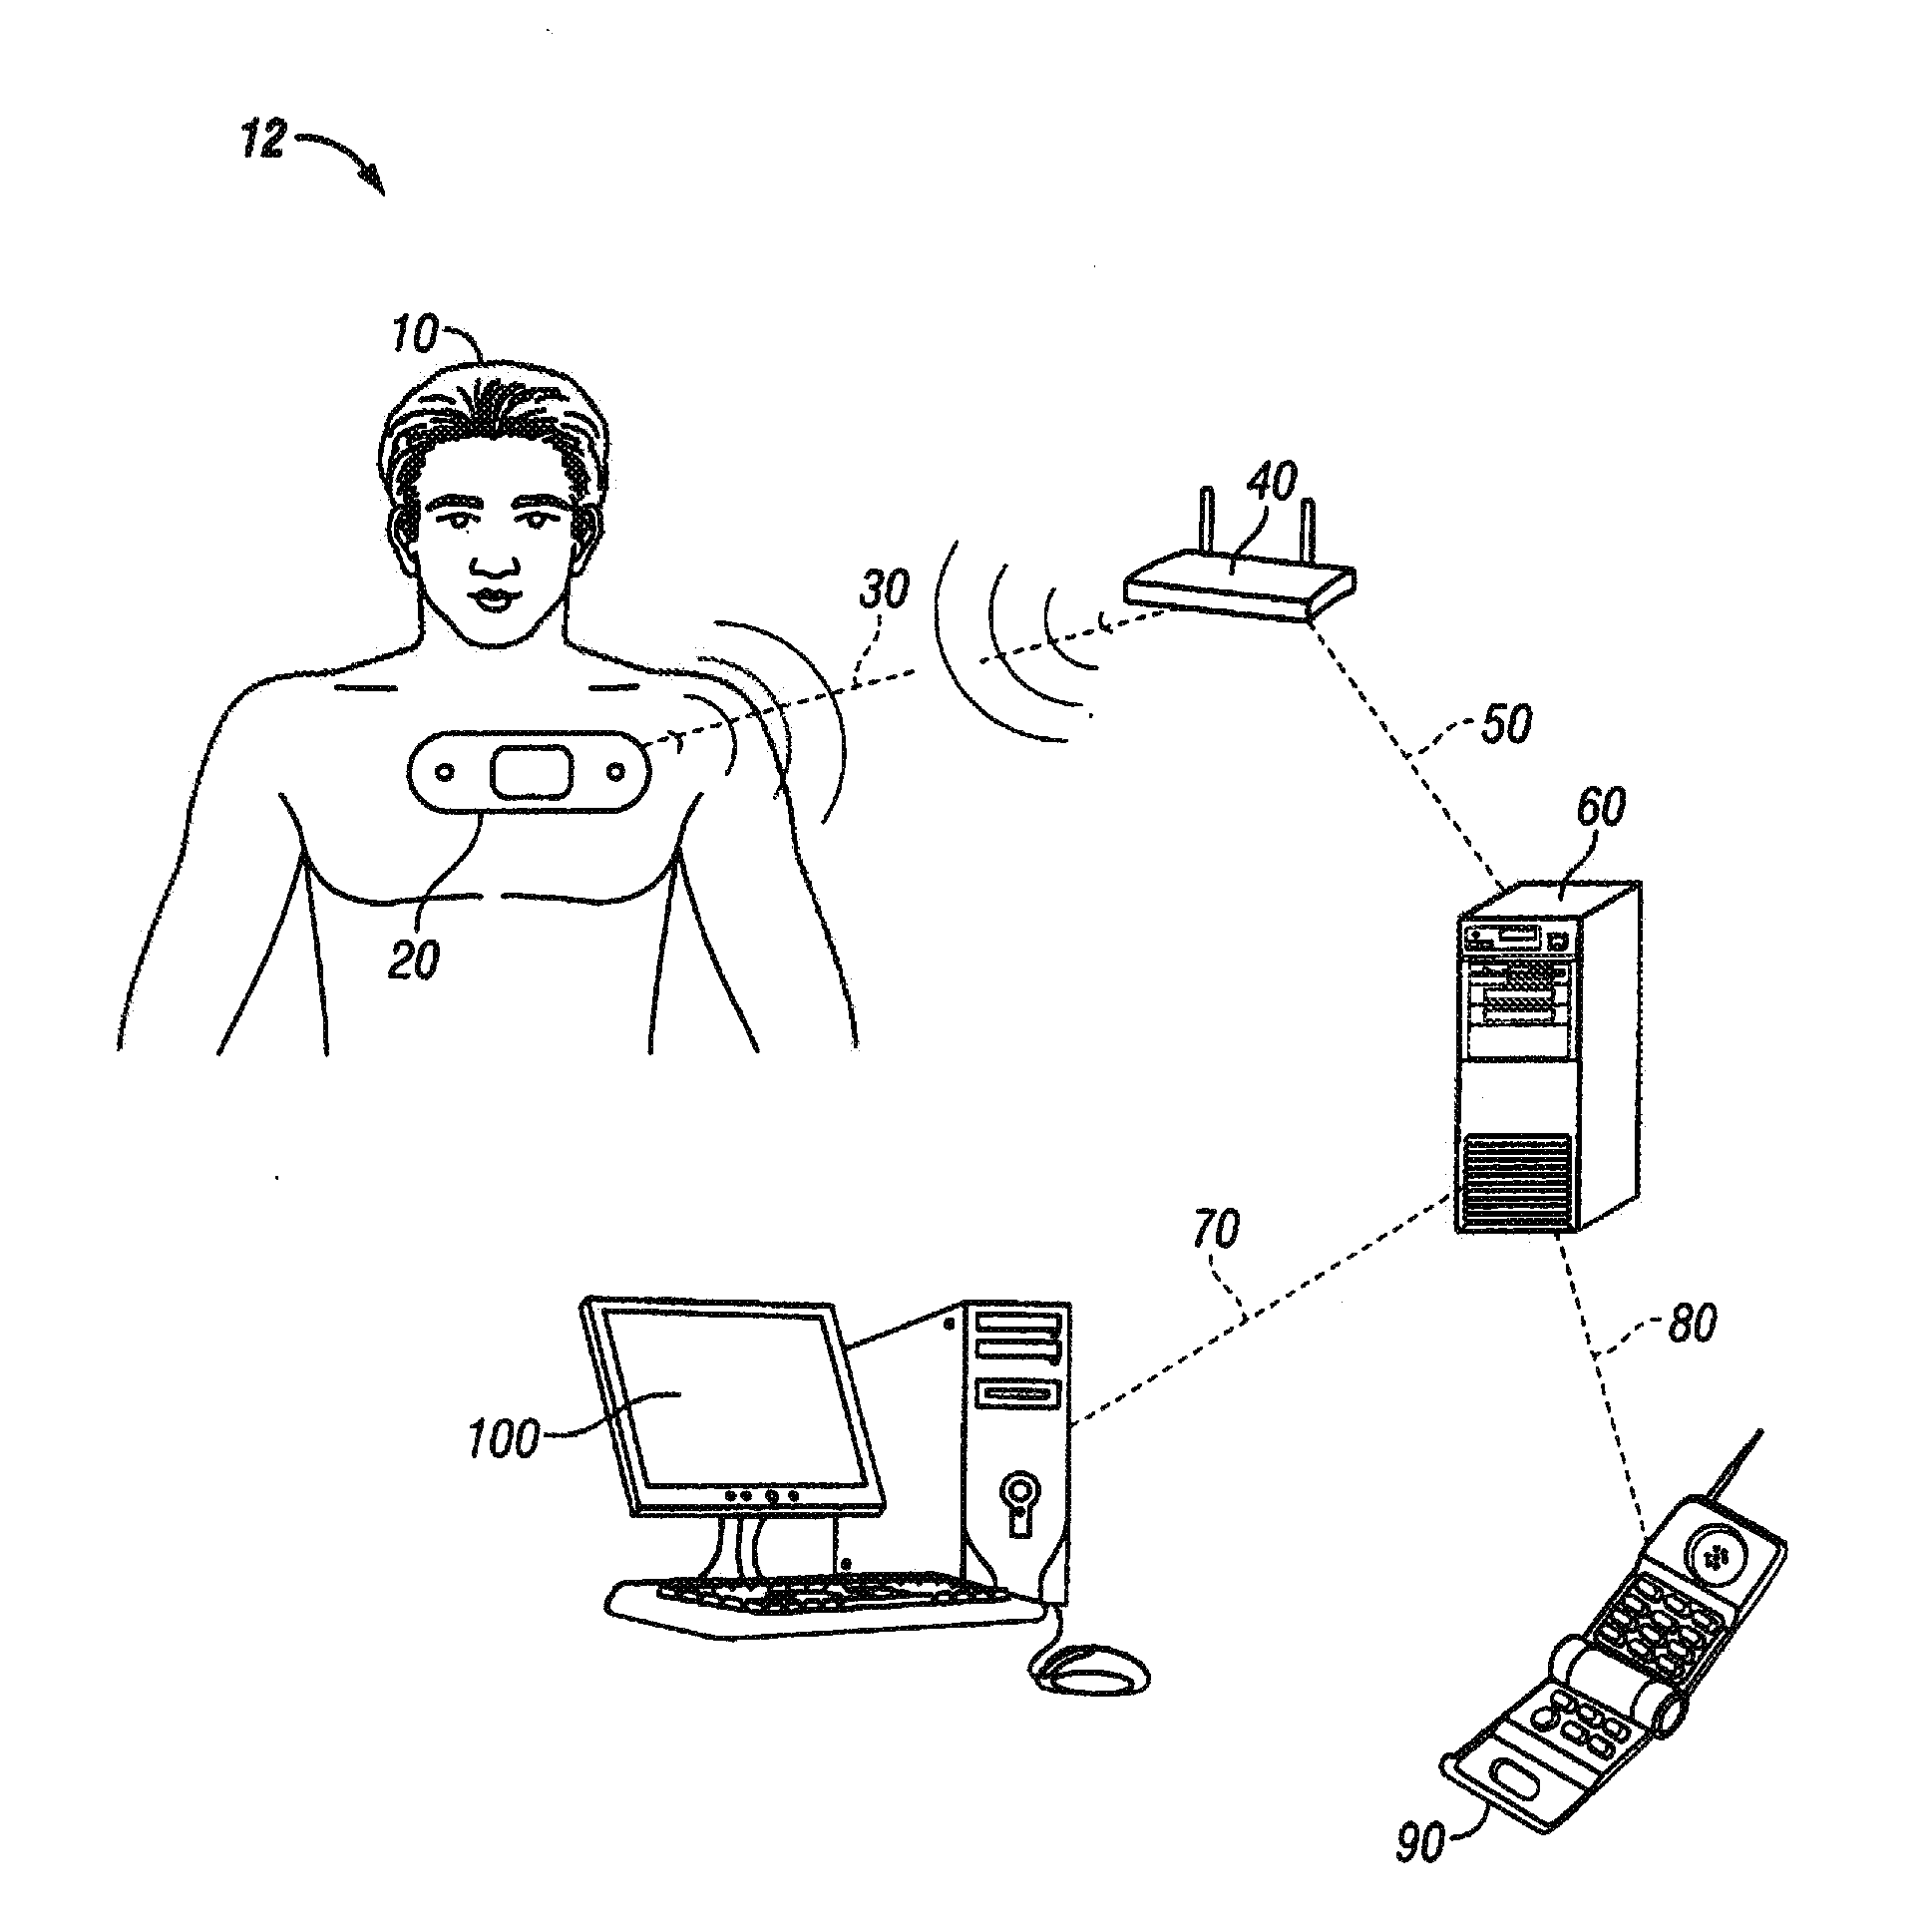 System and method for reducing false alarms and false negatives based on motion and position sensing